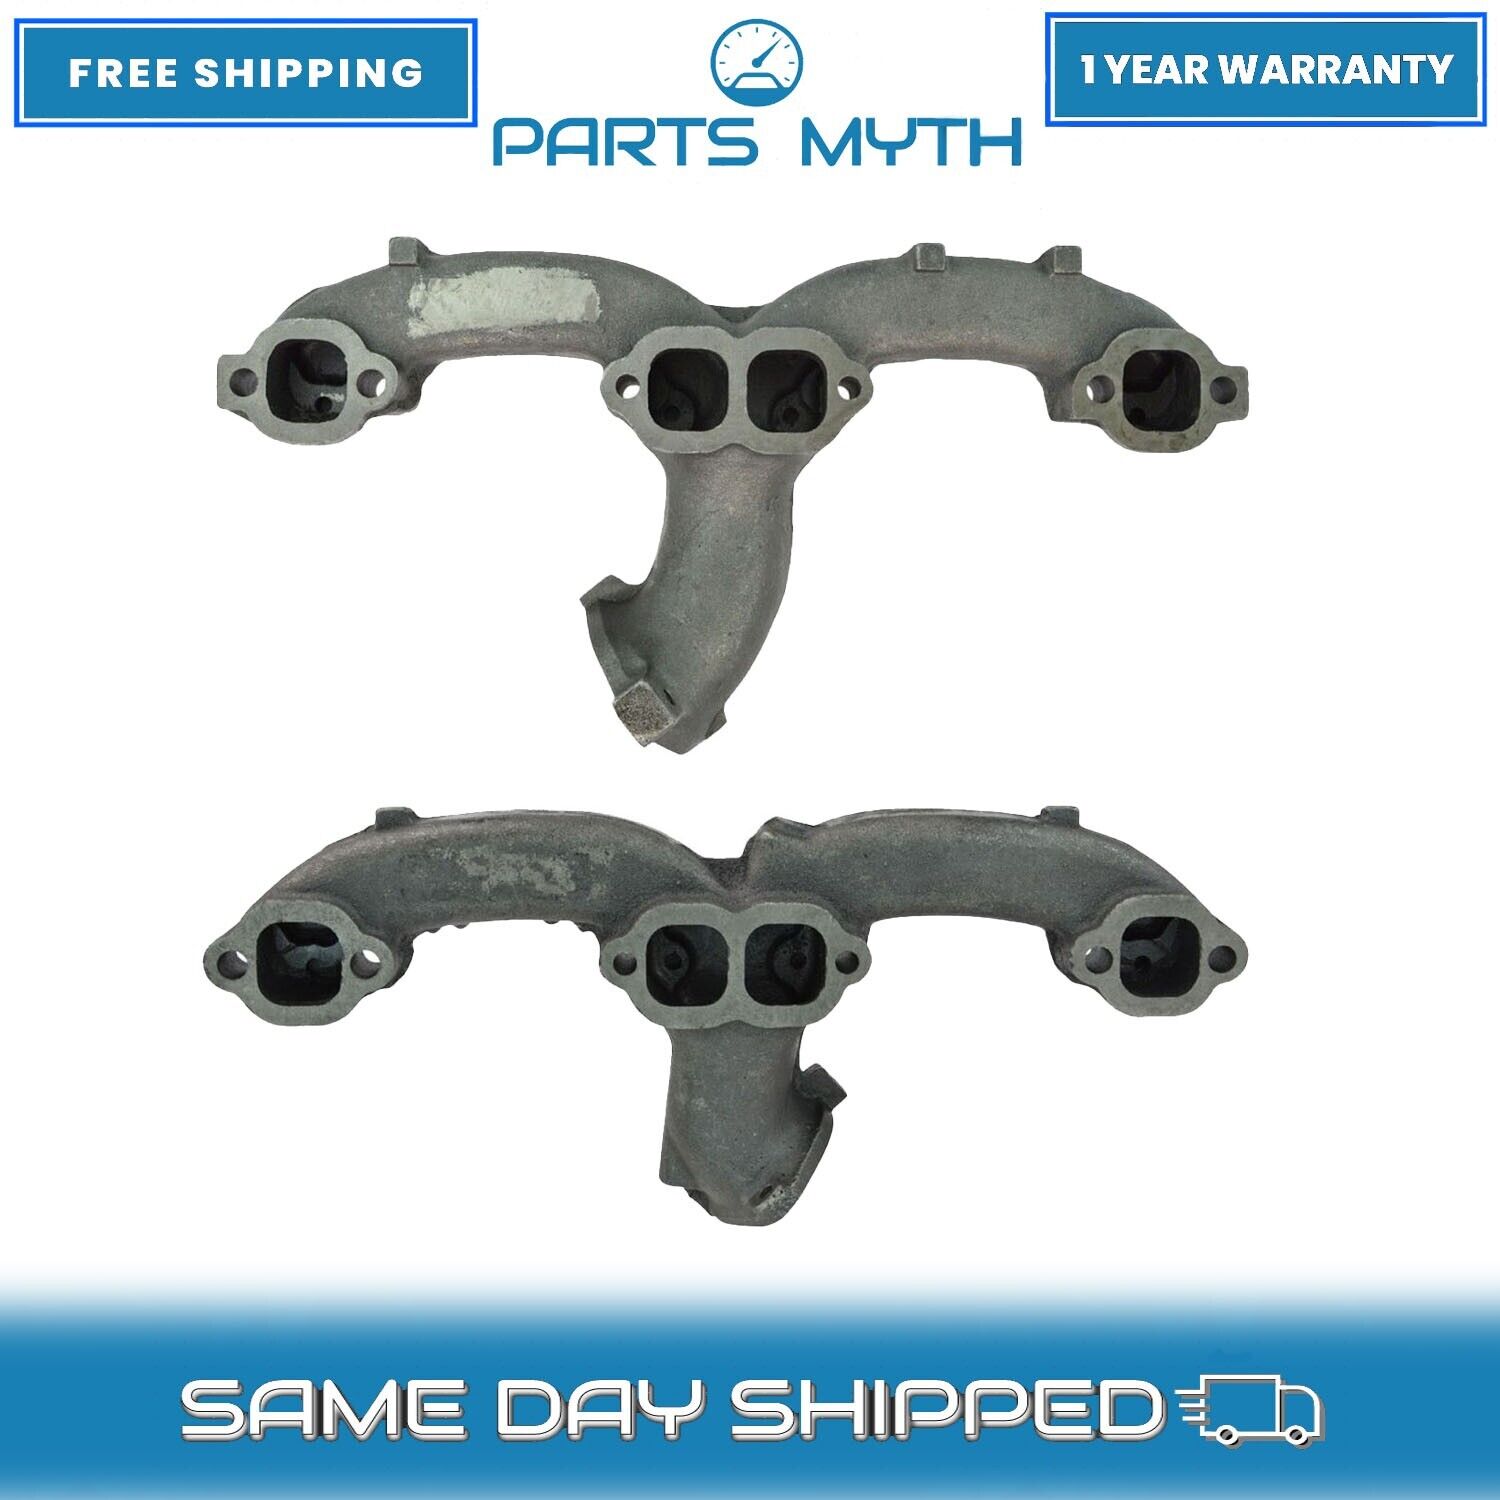 NEW Exhaust Manifolds Pair Set Fits For 1968-1972 Chevy GMC Pickup Truck Van V8